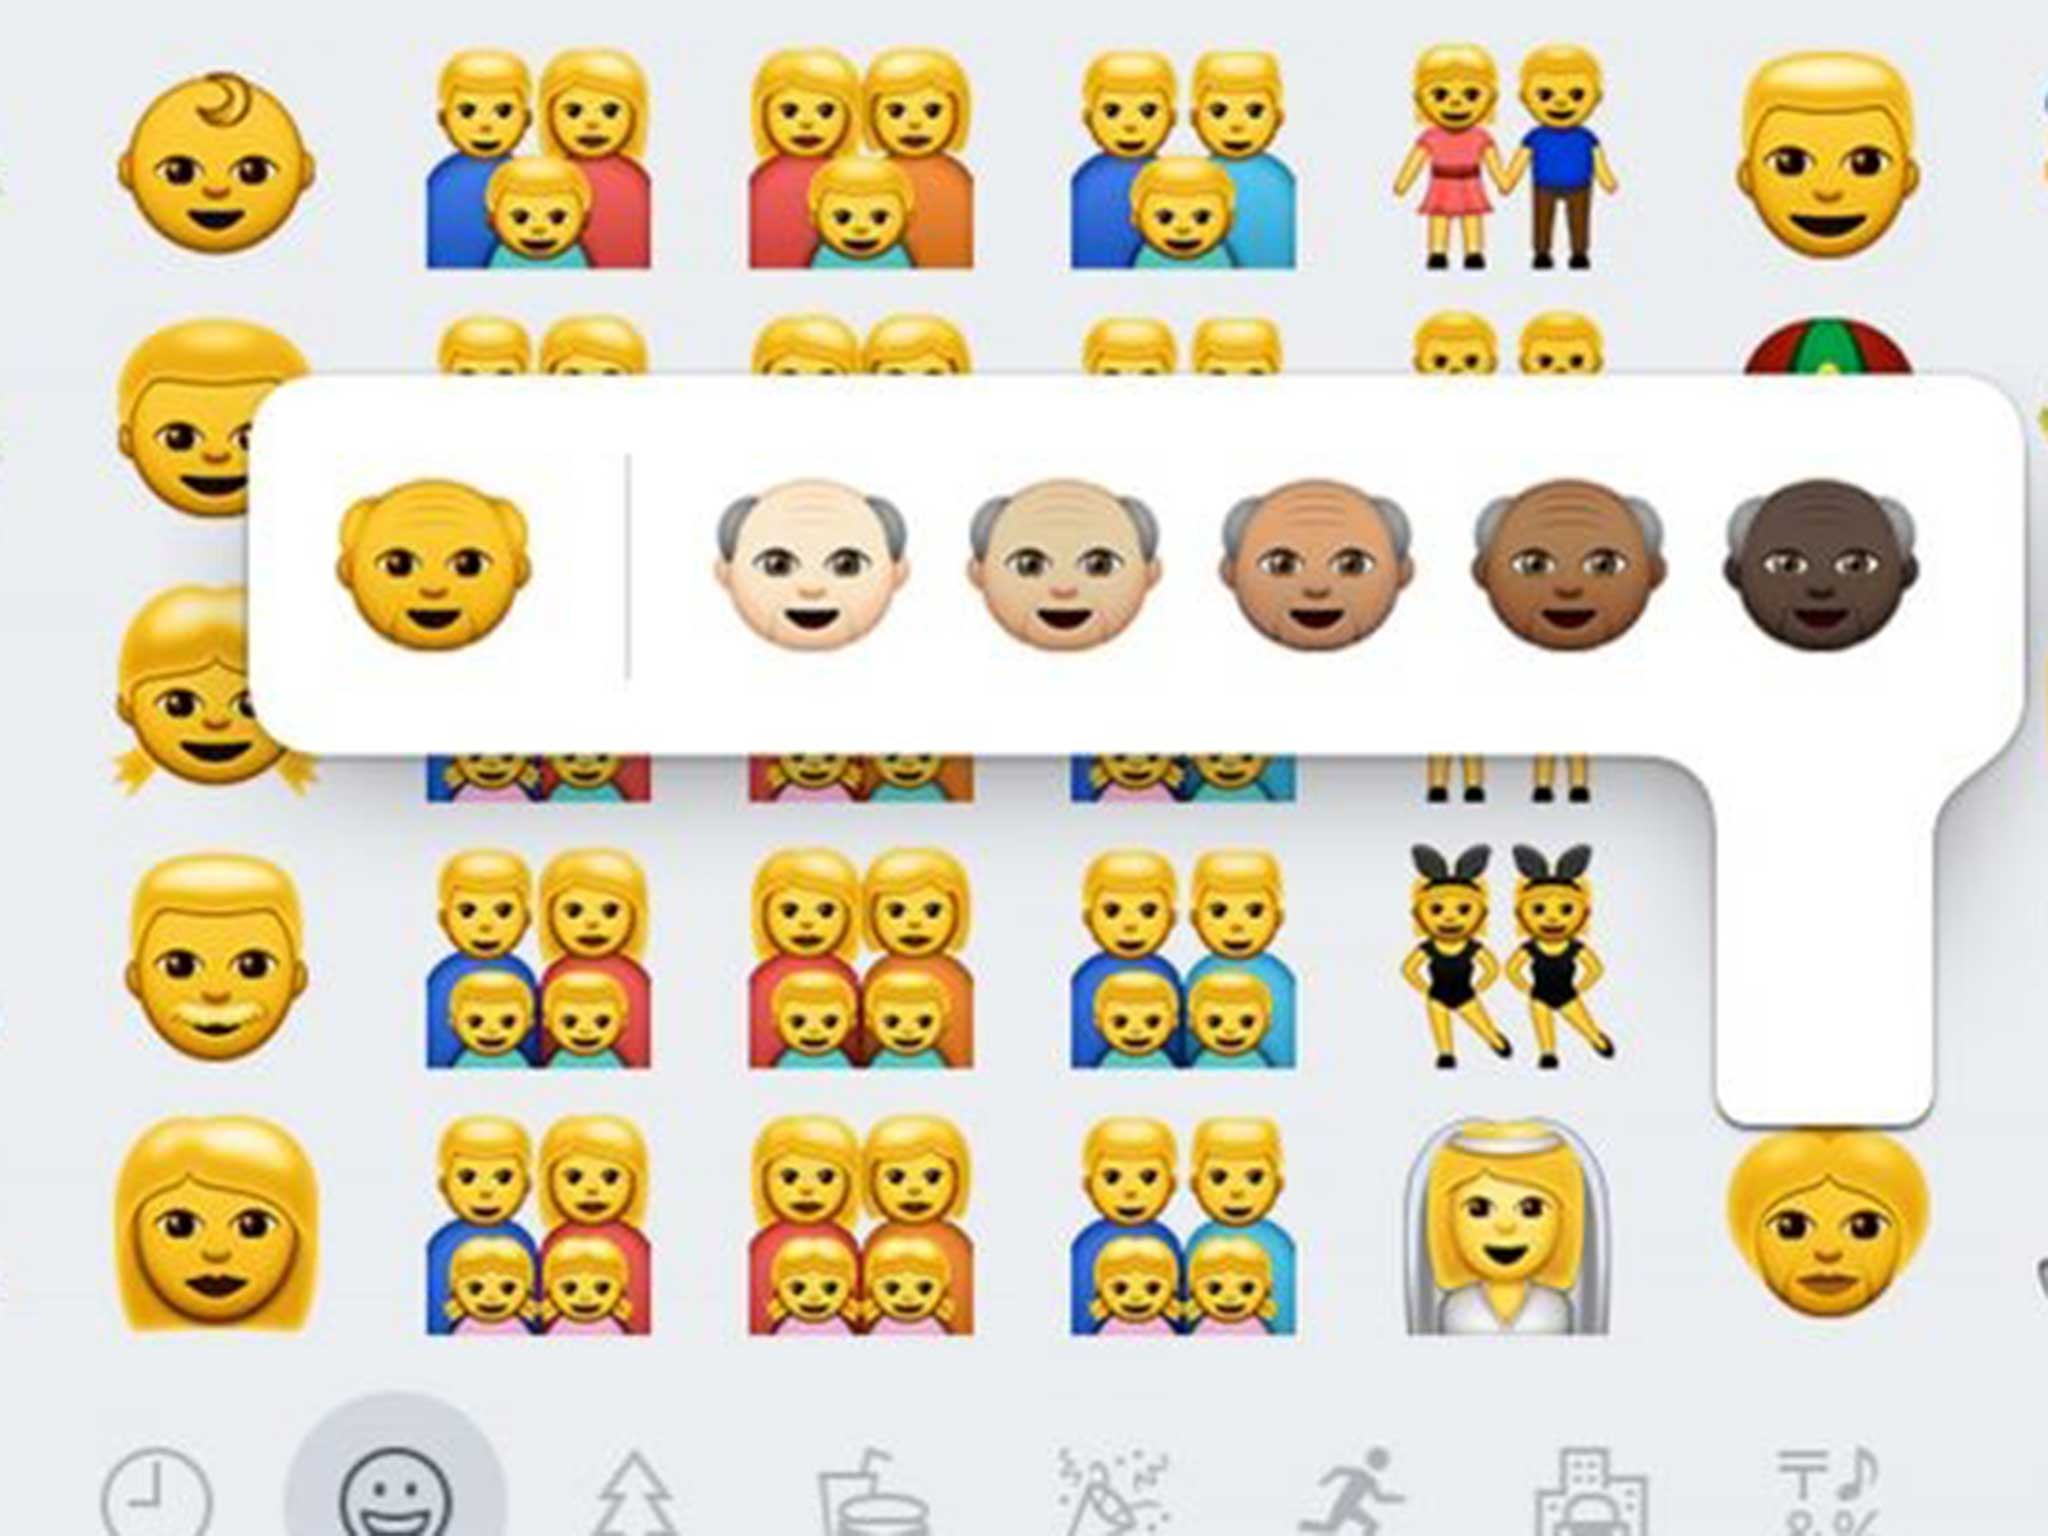 Colour in: an iPhone 6 screenshot shows some of the 300- plus new emoji available with the iOS 8.3 software update